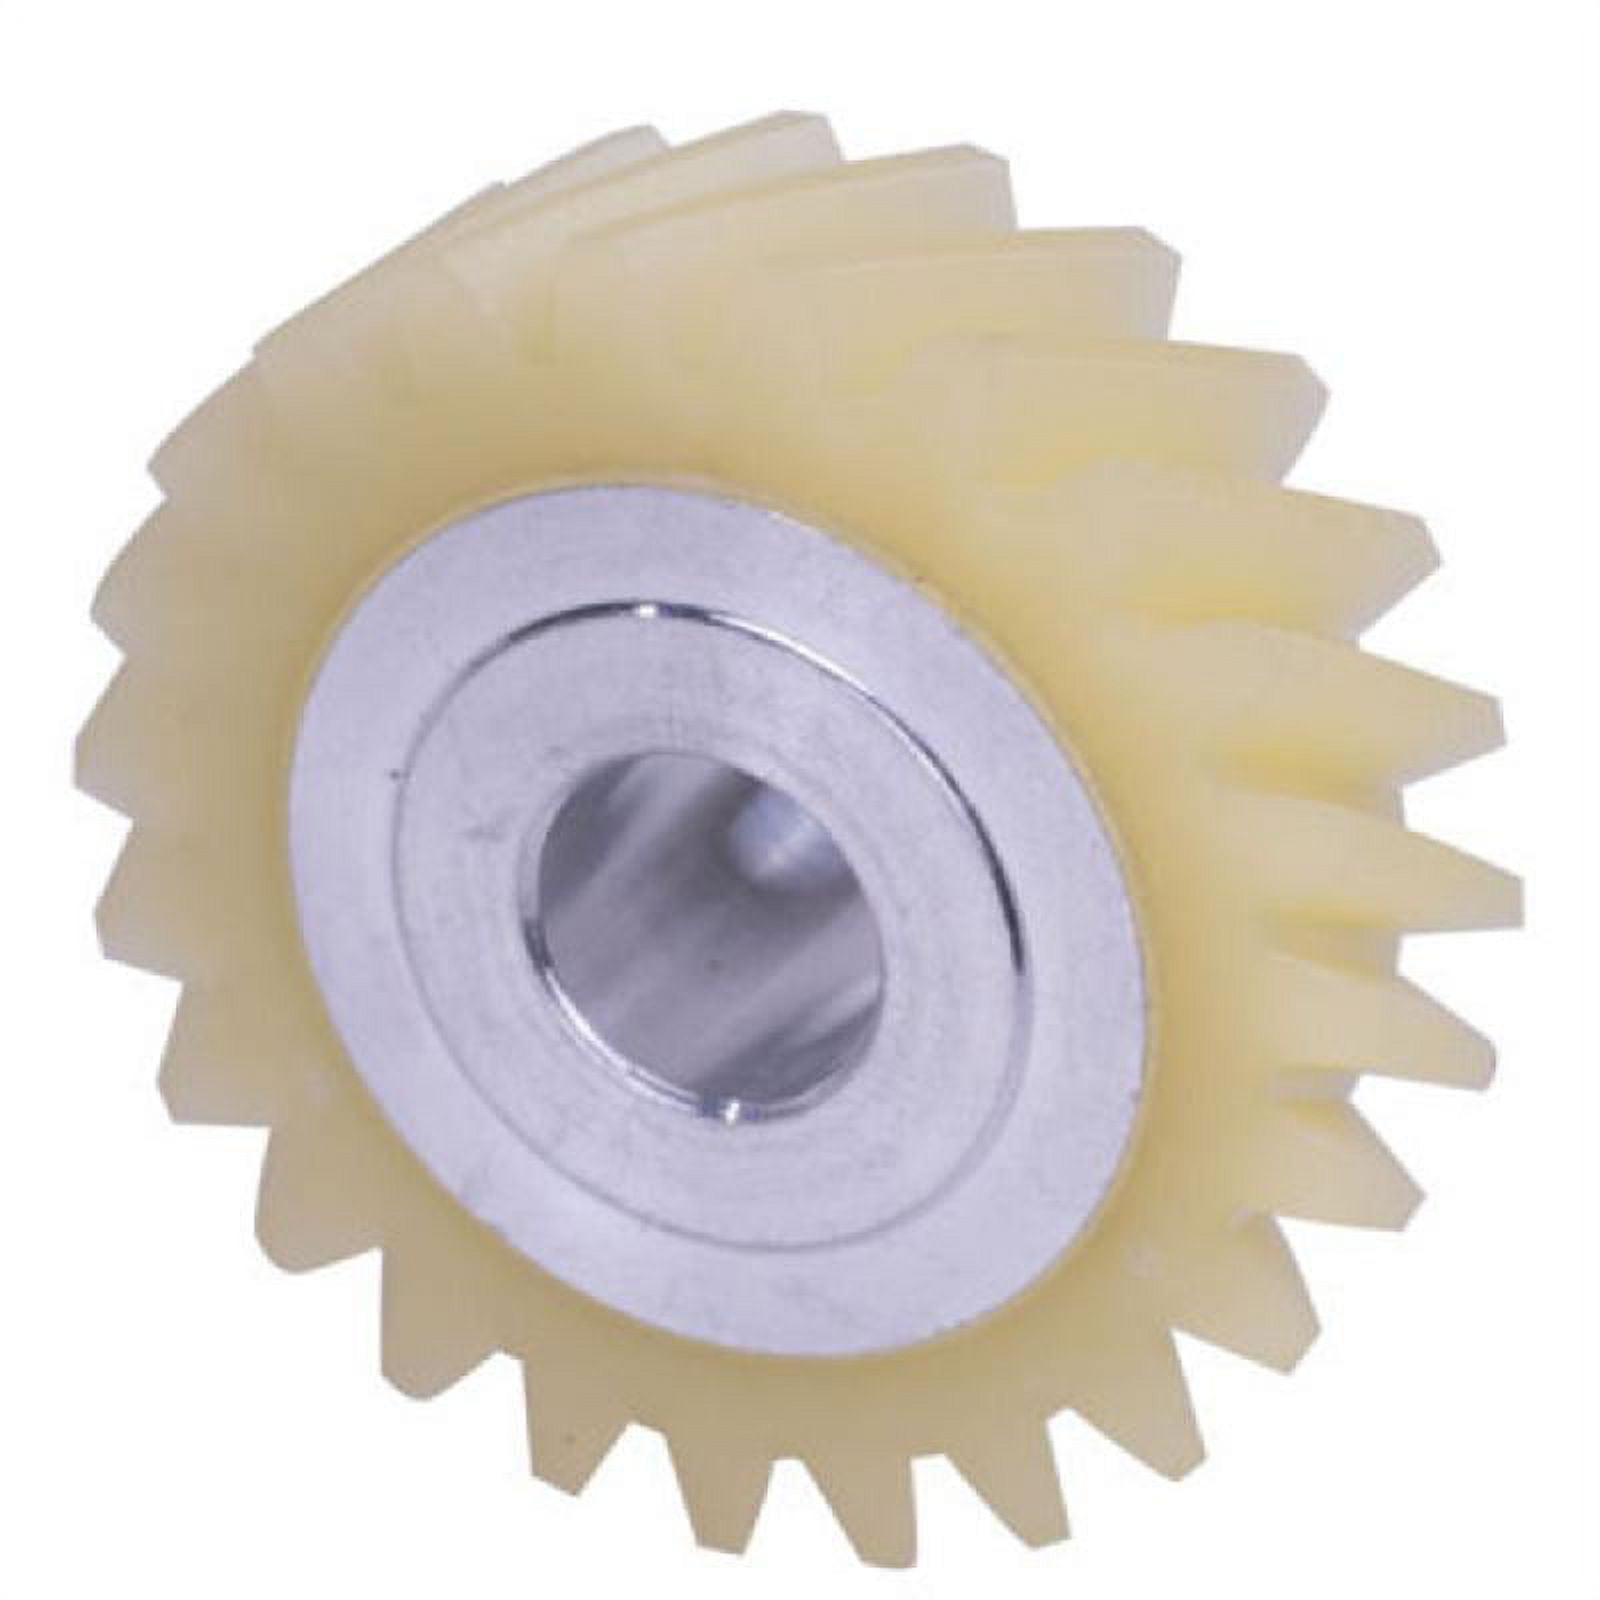 W10112253 & 240210-2 Mixer Worm Gear Kit Compatible with Most of Whirlpool  & KitchenAid Stand Mixer, Included 4162324 Gasket and Food Grade Grease 